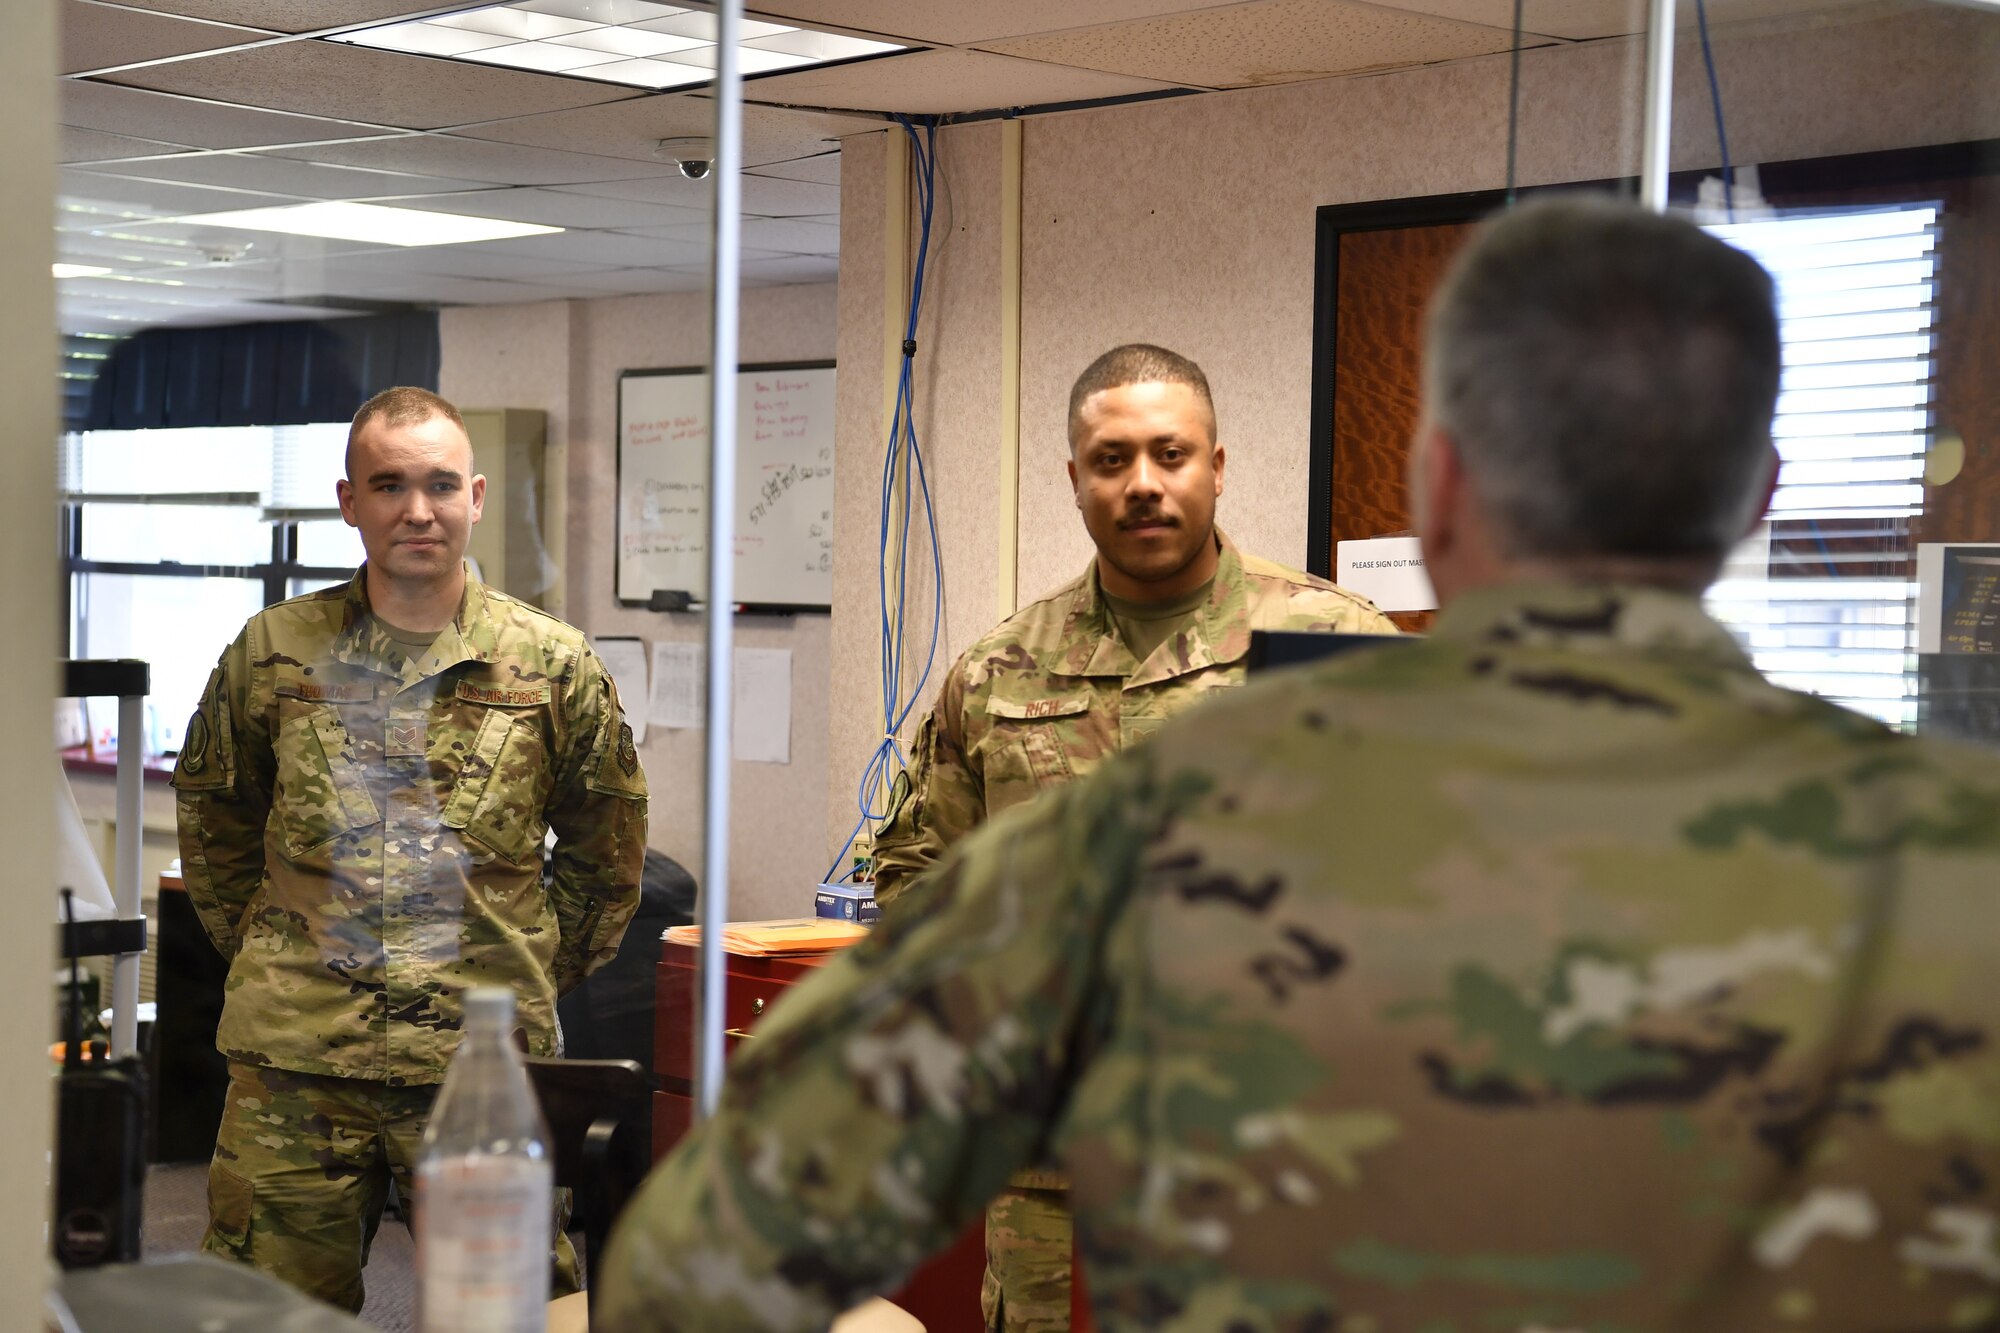 Chaplain (Col.) Michael Husfelt, 87th Air Base Wing senior chaplain, interacts with “Camp JB MDL” front desk personnel on Joint Base McGuire-Dix-Lakehurst, N.J., April 2, 2020. During his visit, Husfelt and his Chapel team went door to door and offered words of encouragement to military members who are quarantined and isolated after newly arriving onto the installation.